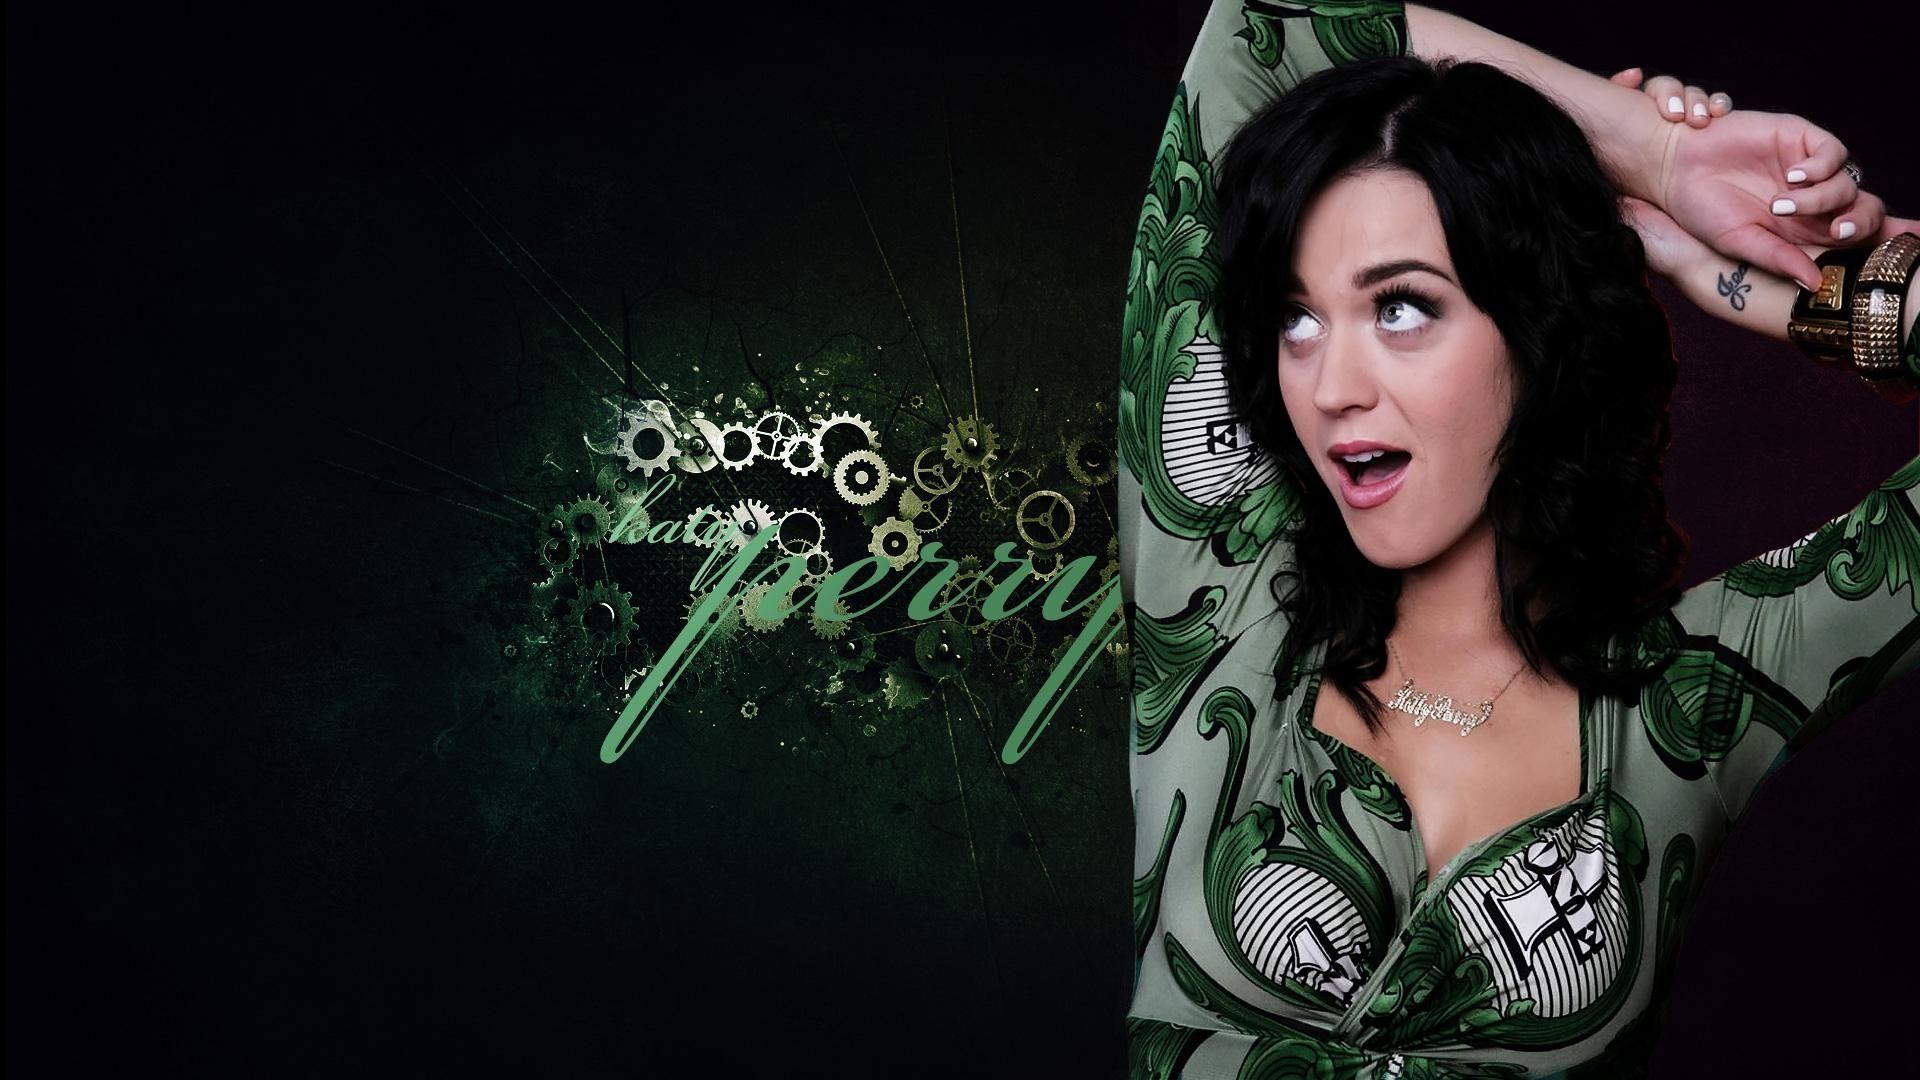 Download Wallpaper 1920x1080 katy perry, dress, emotions, hands